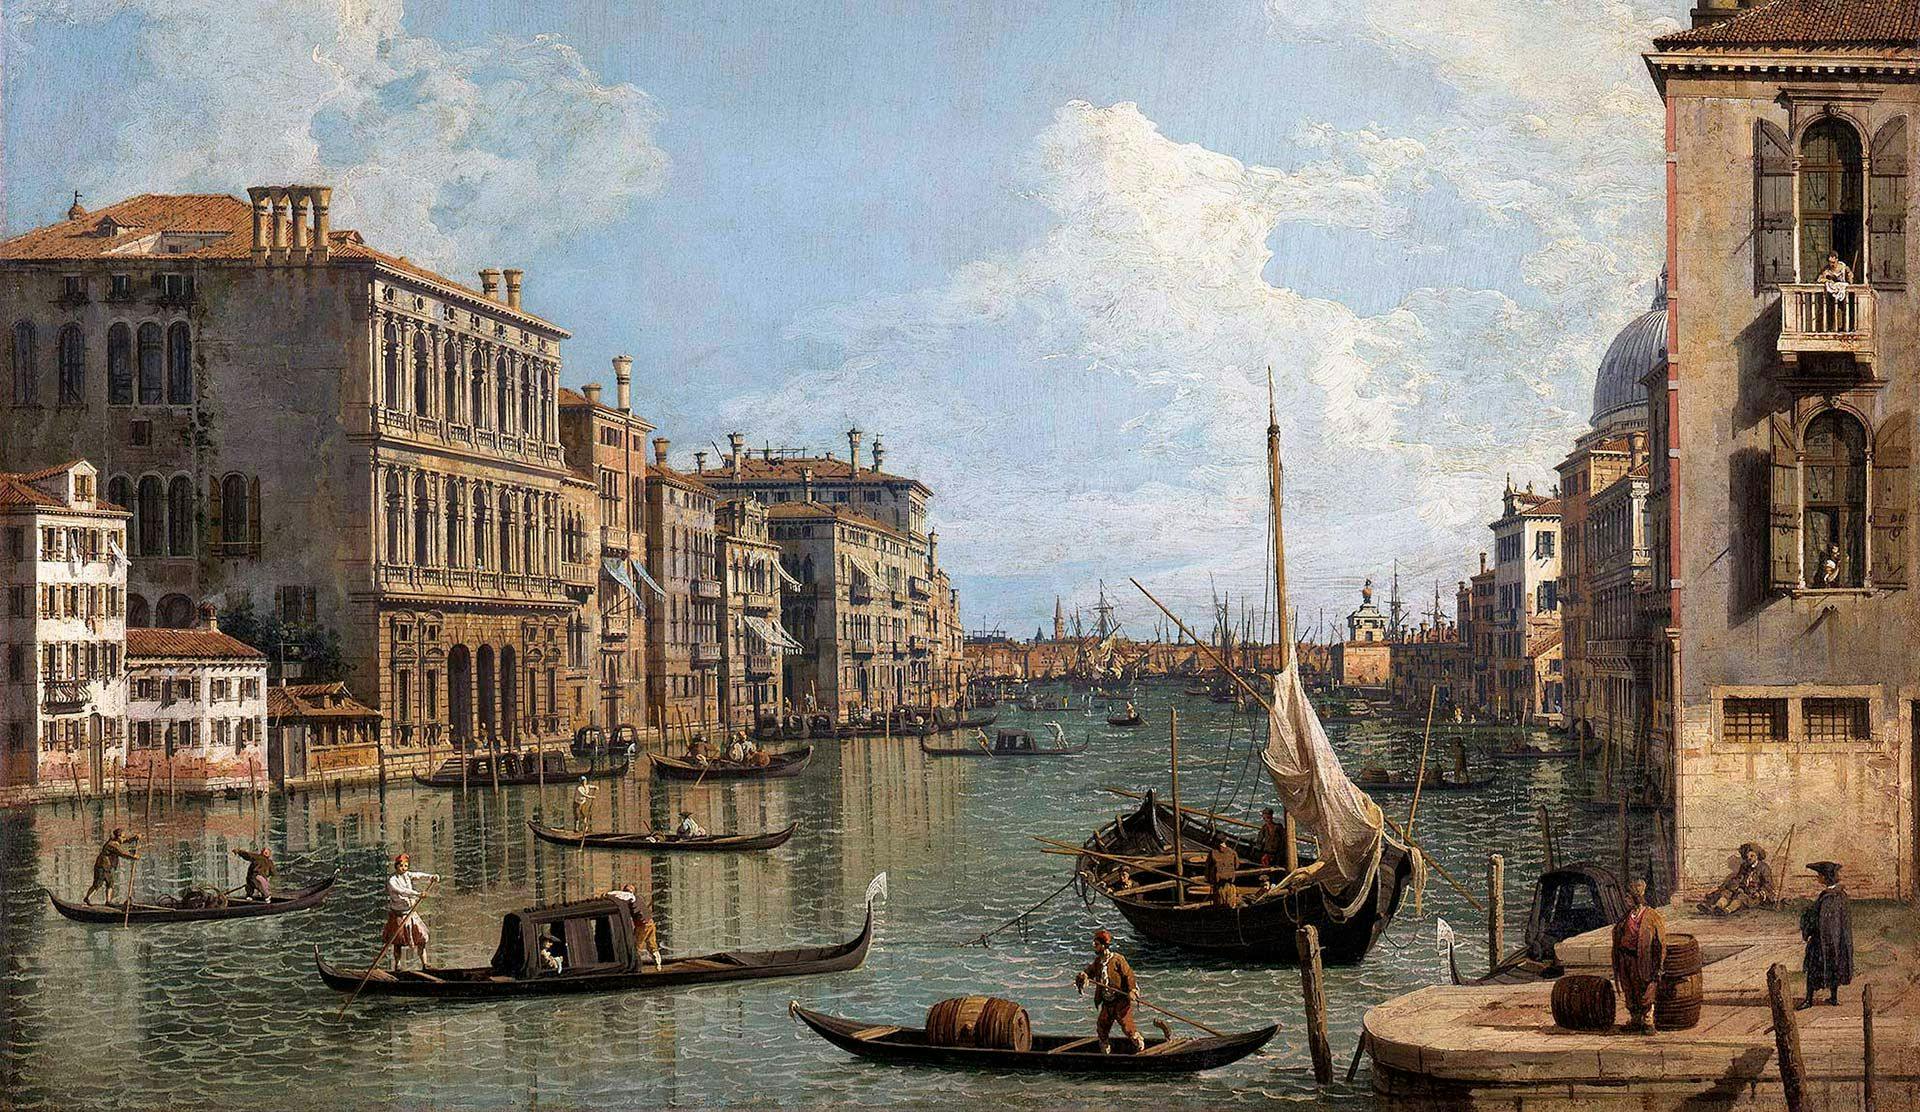 A detail from a painting by Canaletto, titled View of the Grand Canal looking toward the Punta della Dogana from Campo Sant’Ivo, dating from the 2nd third of the 18th Century.